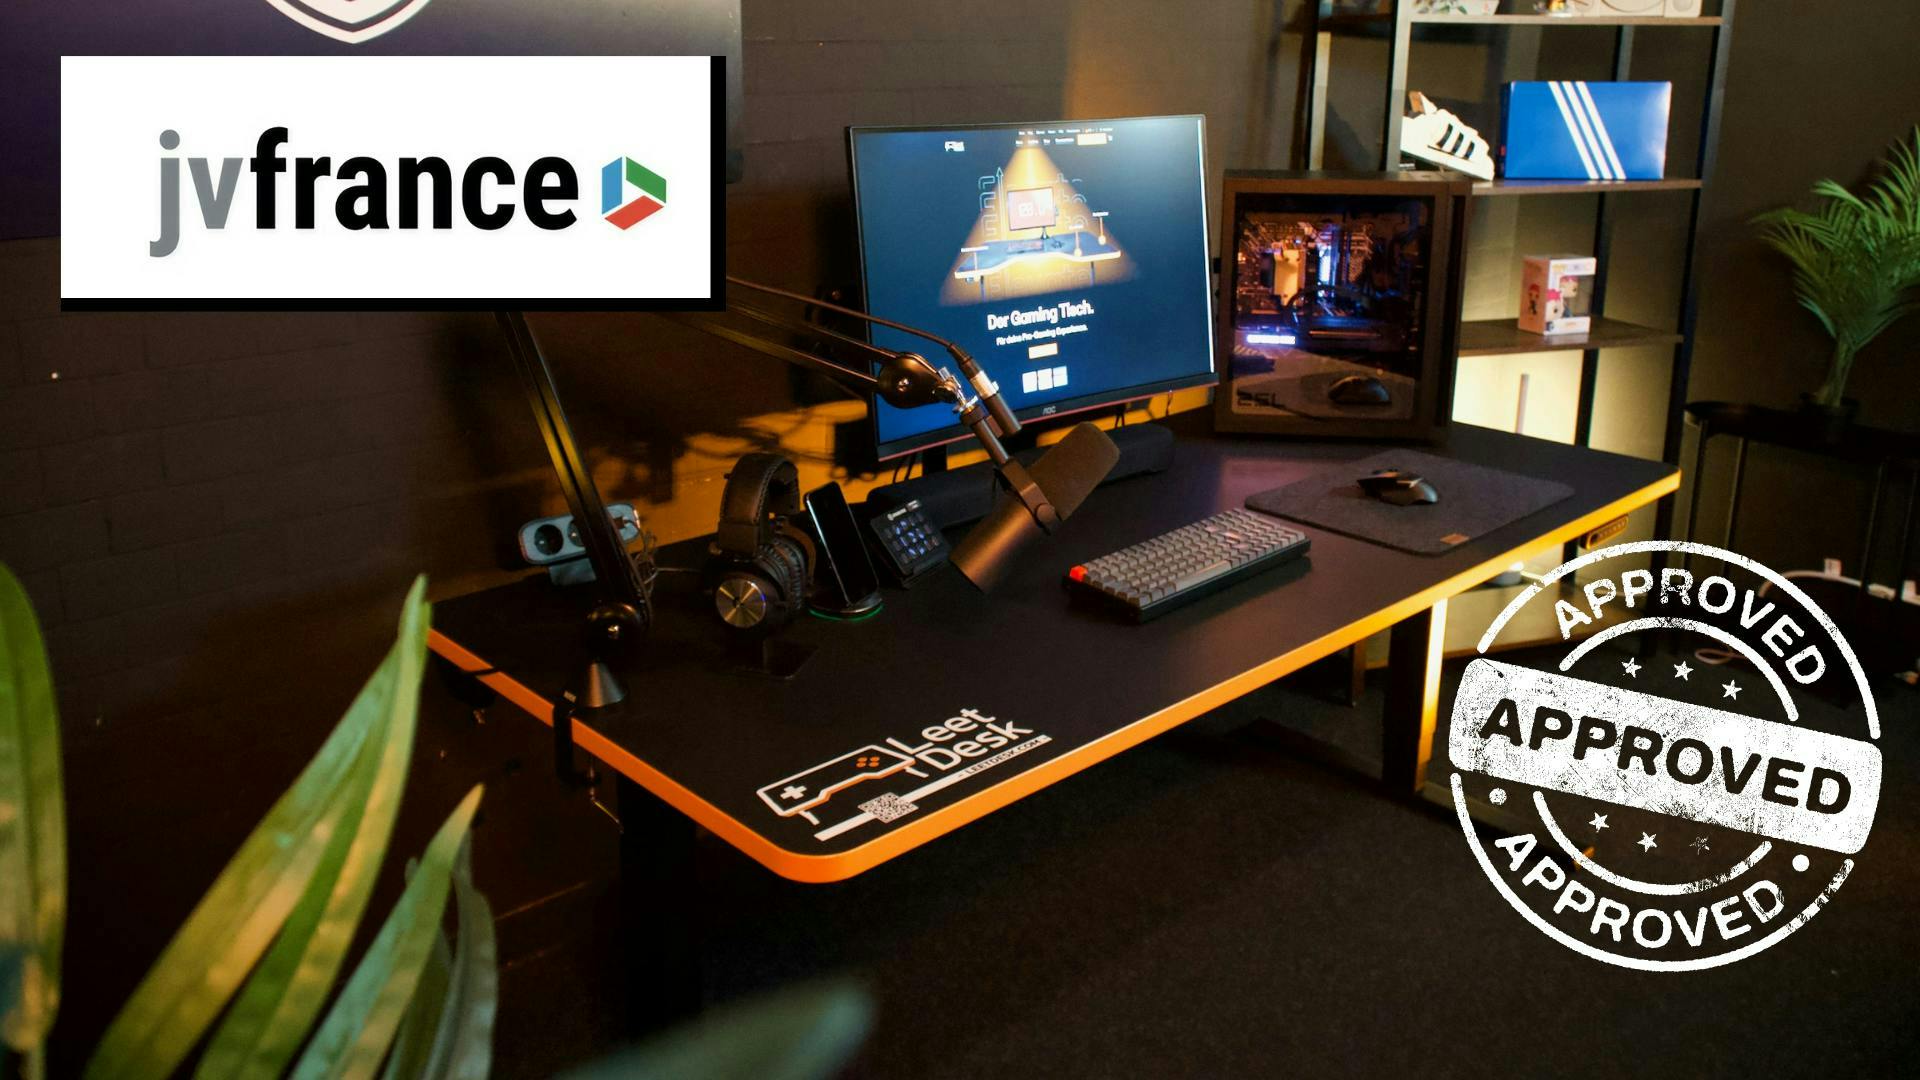 A LeetDesk surrounded by the jvfrance logo and a seal of approval. 